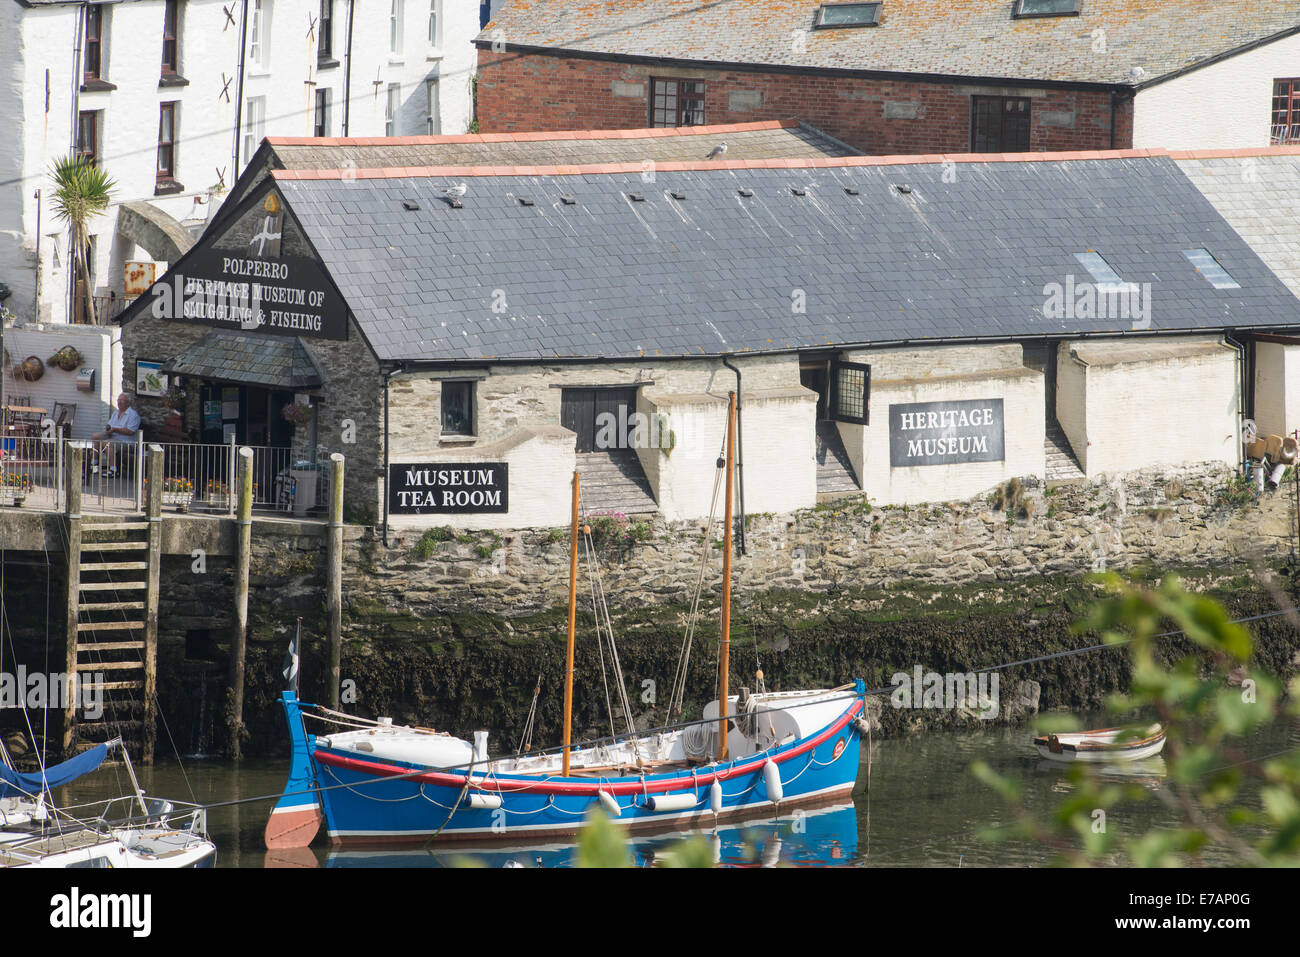 Fishing village houses and rooftops at traditional historic Polperro, Cornwall, England Stock Photo